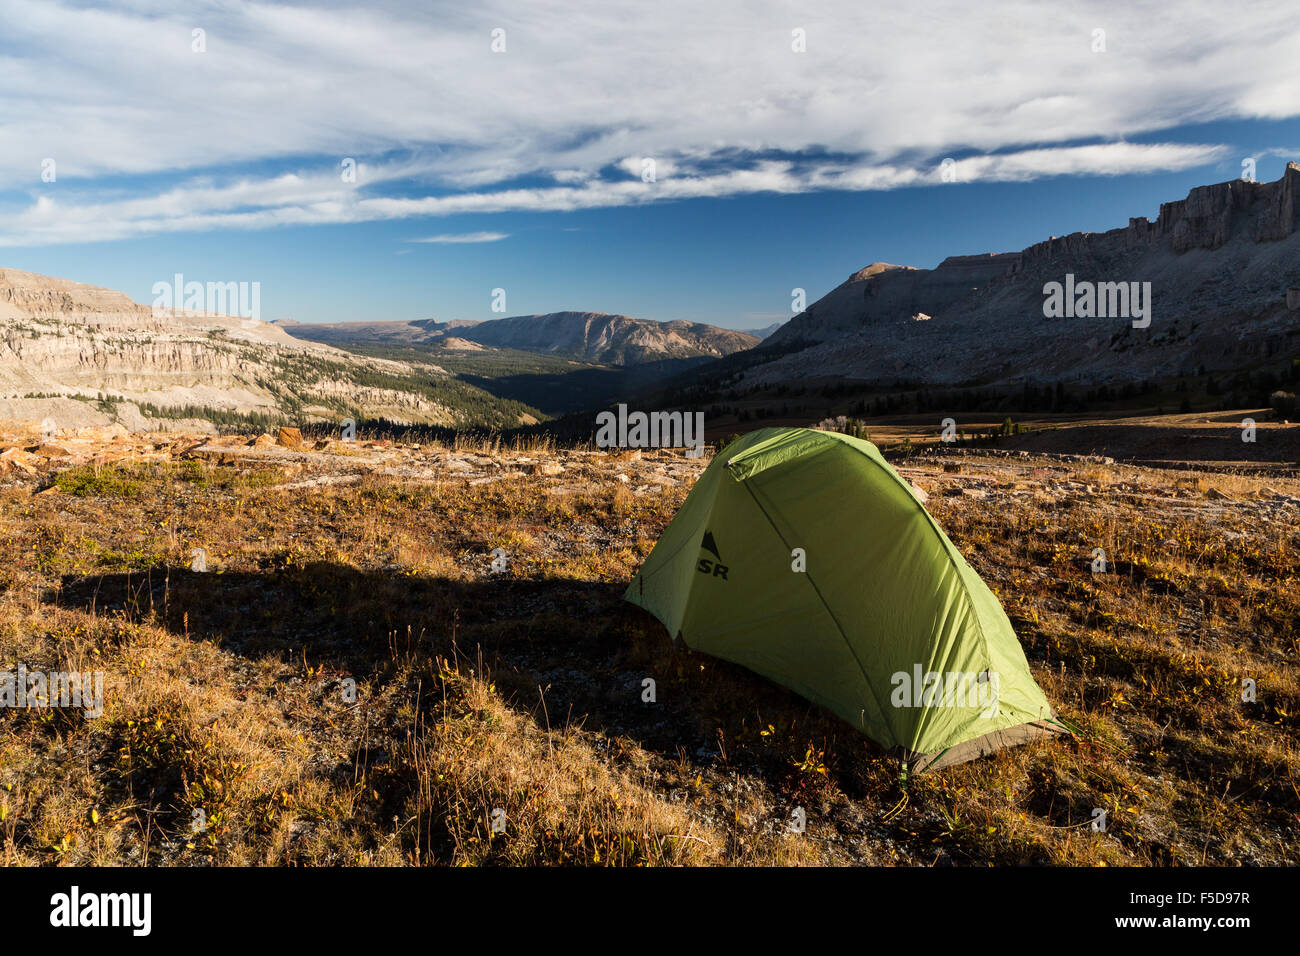 A tent set up in a large basin among Gros Ventre Peaks, Gros Ventre Wilderness, Wyoming Stock Photo